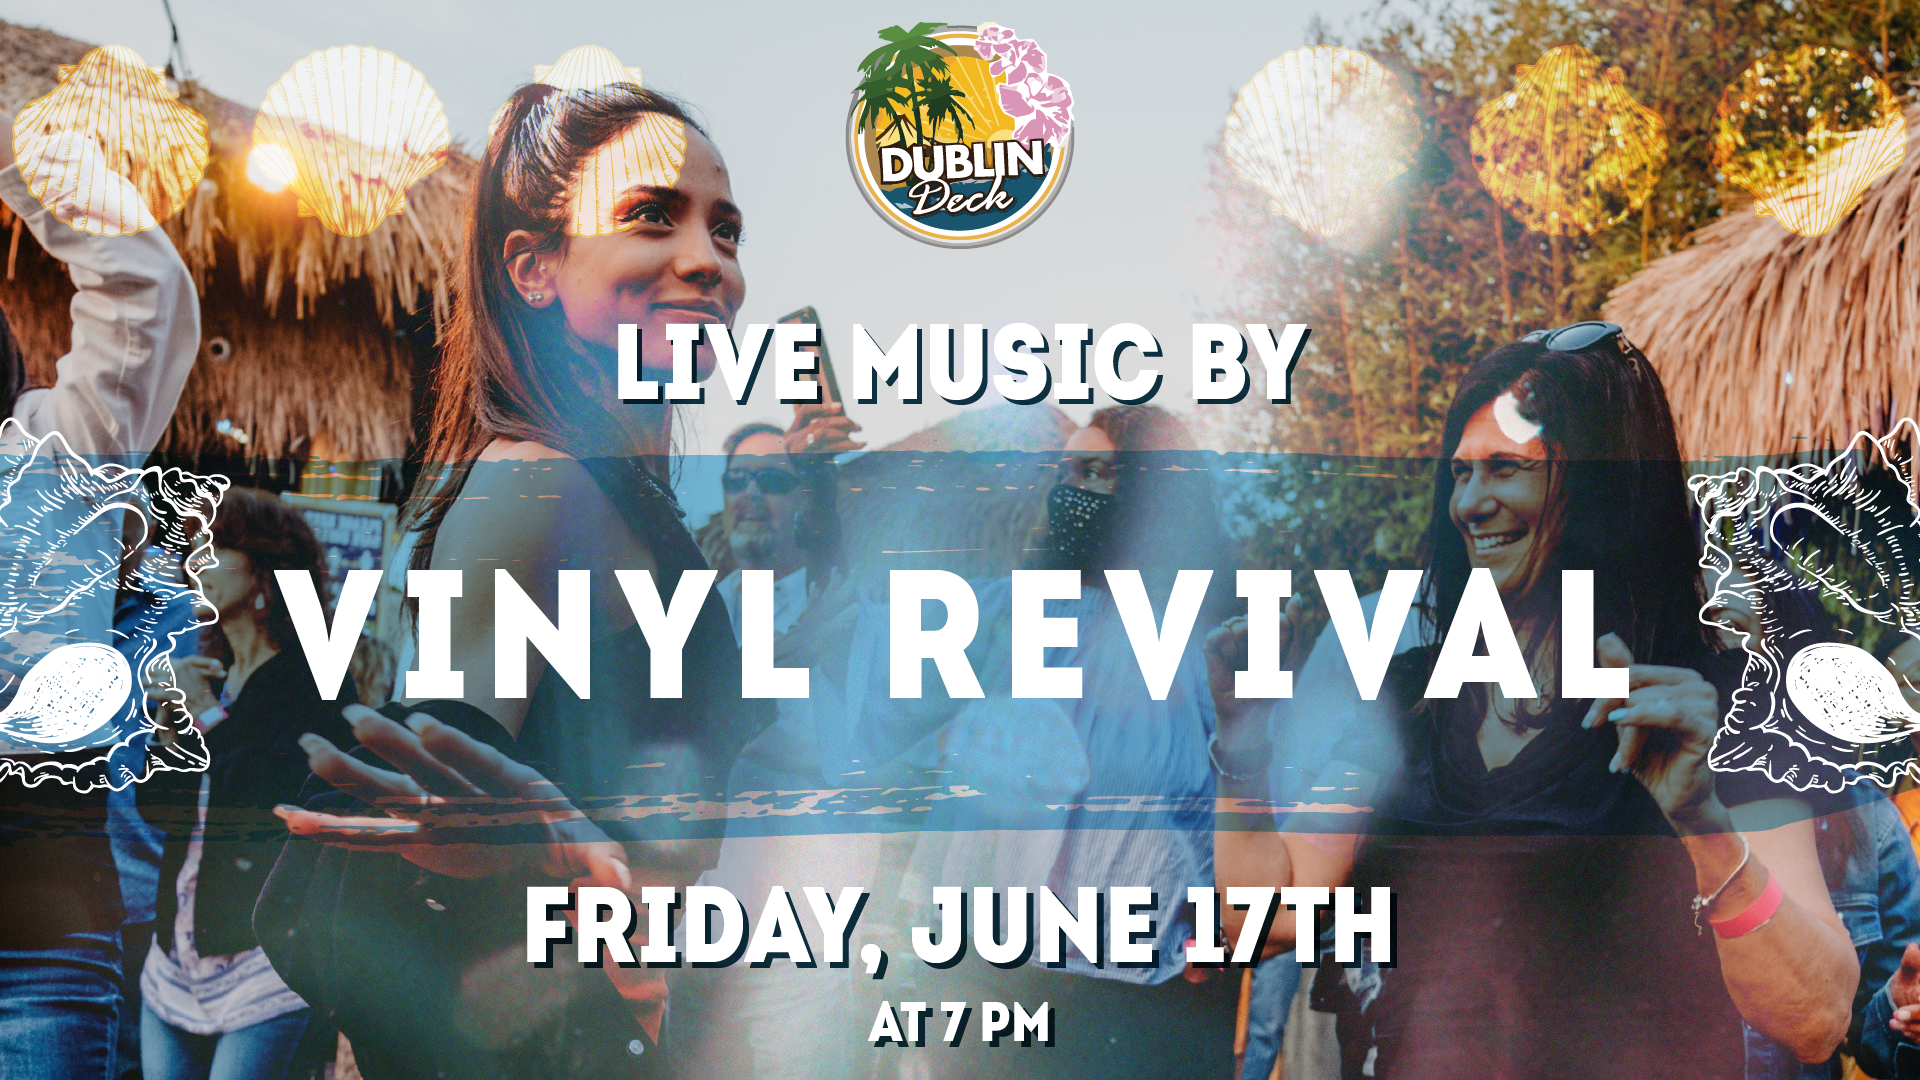 Jam out with Vinyl Revival at Dublin Deck! Music begins at 7PM